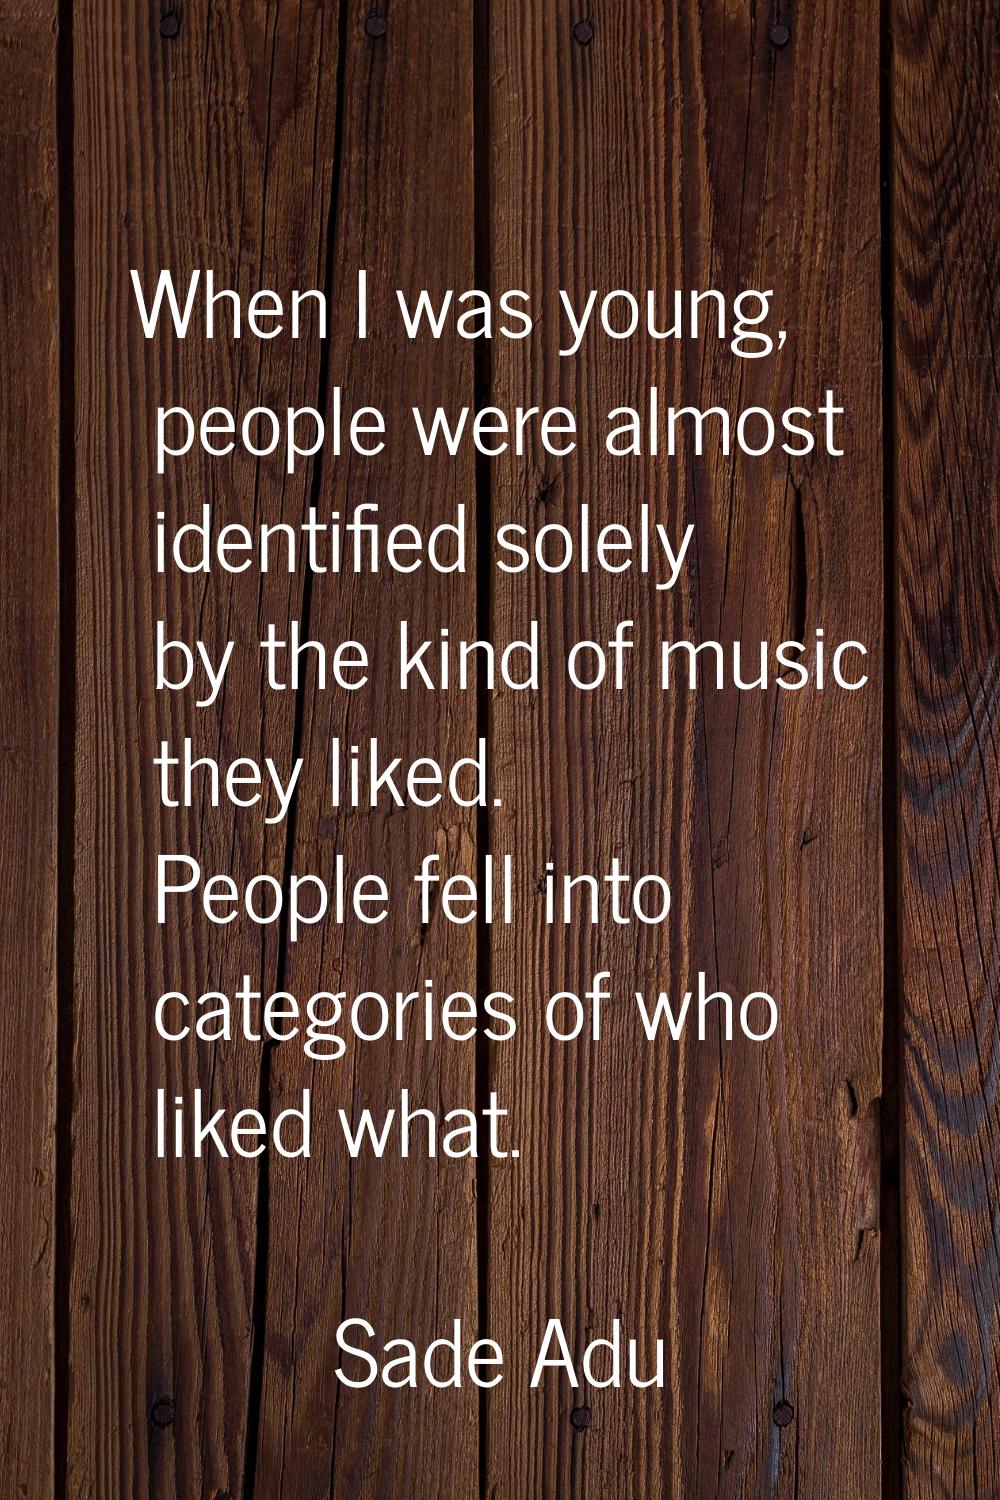 When I was young, people were almost identified solely by the kind of music they liked. People fell